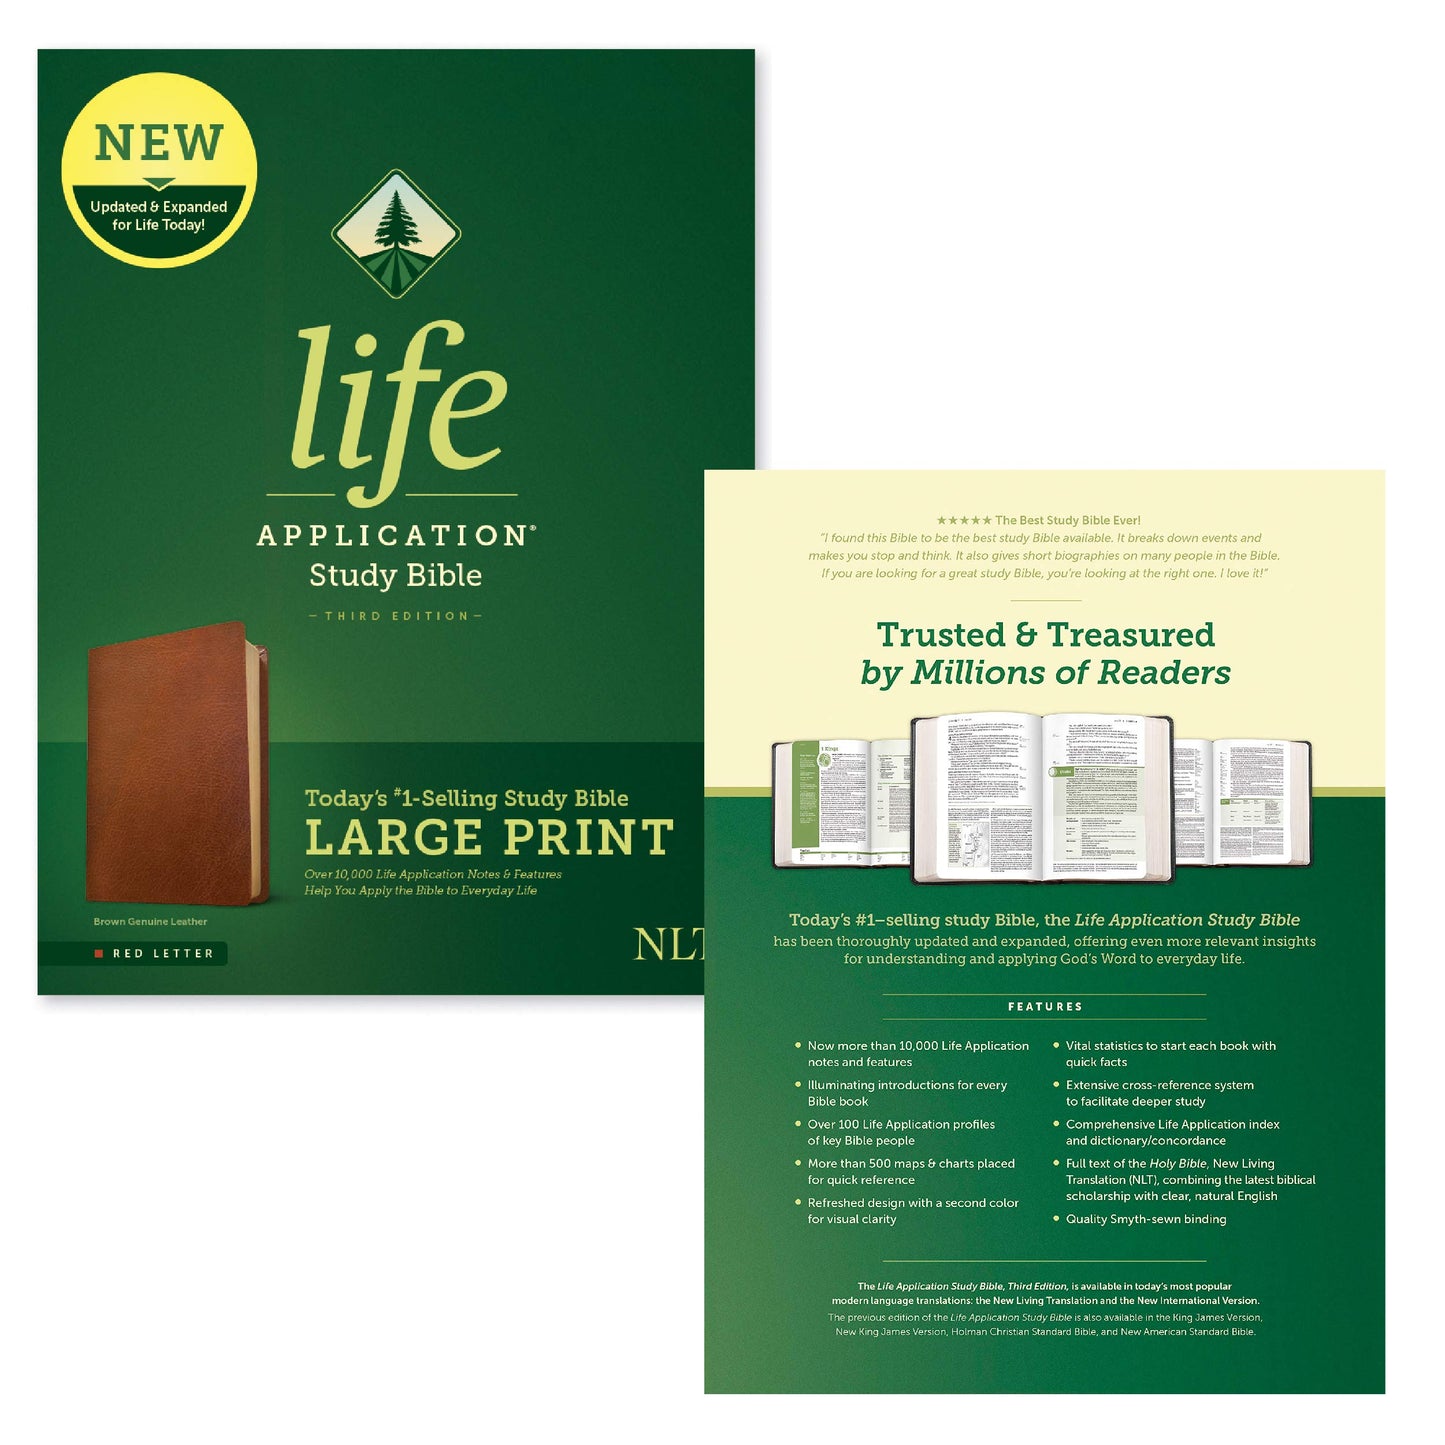 Tyndale NLT Life Application Study Bible, Third Edition, Large Print (Genuine Leather, Brown, Red Letter) – New Living Translation Bible, Large Print Study Bible for Enhanced Readability